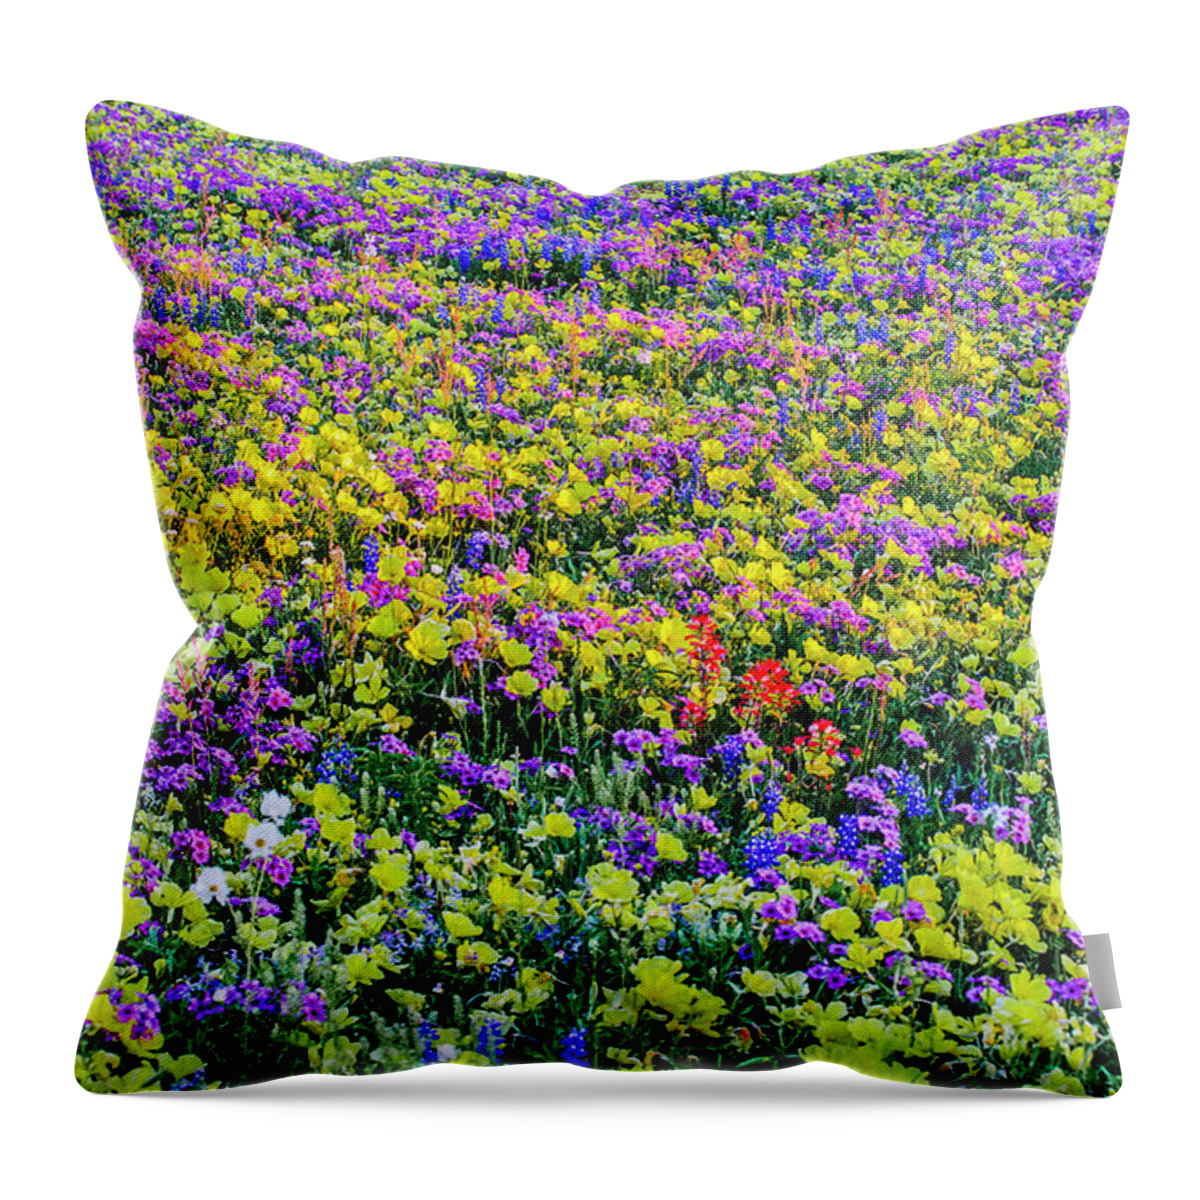 Texas Bluebonnets Throw Pillow featuring the photograph Wildflower Bliss by Johnny Boyd